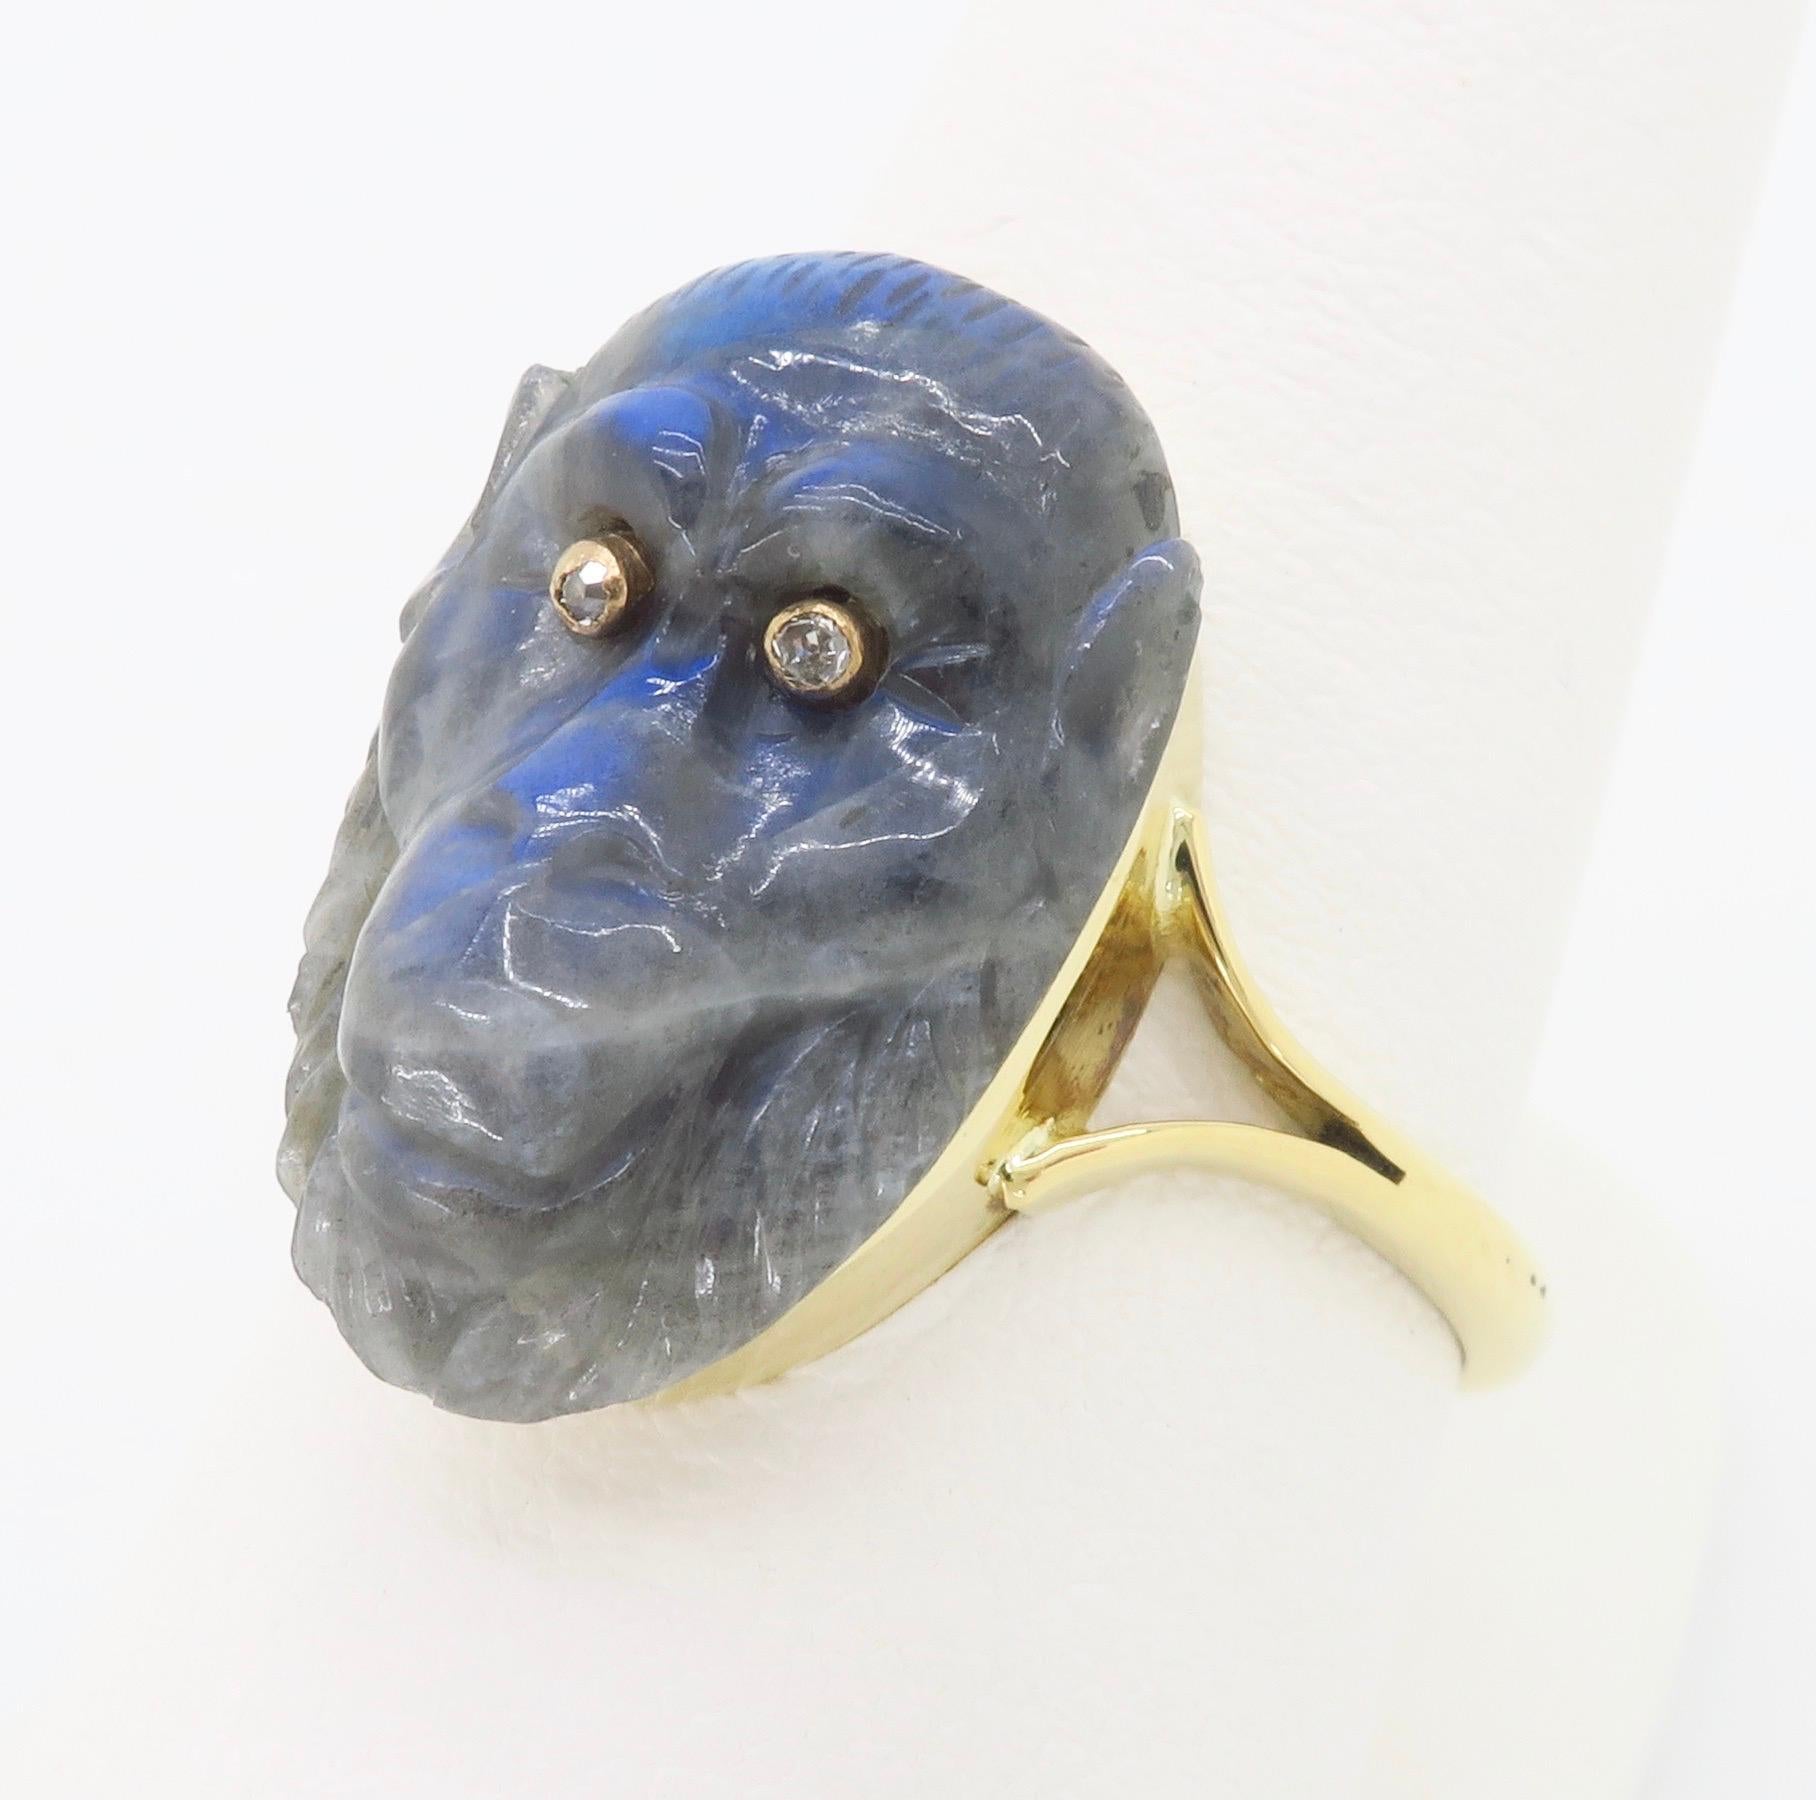 One-of-a-kind carved Labradorite Gorilla, with incredible play of color, with diamond eyes set into an 18k yellow gold ring.

Gemstone: Labradorite & Diamond
Diamond Carat Weight:  Approximately .05CTW
Diamond Cut: Single Cut Round
Metal: Yellow